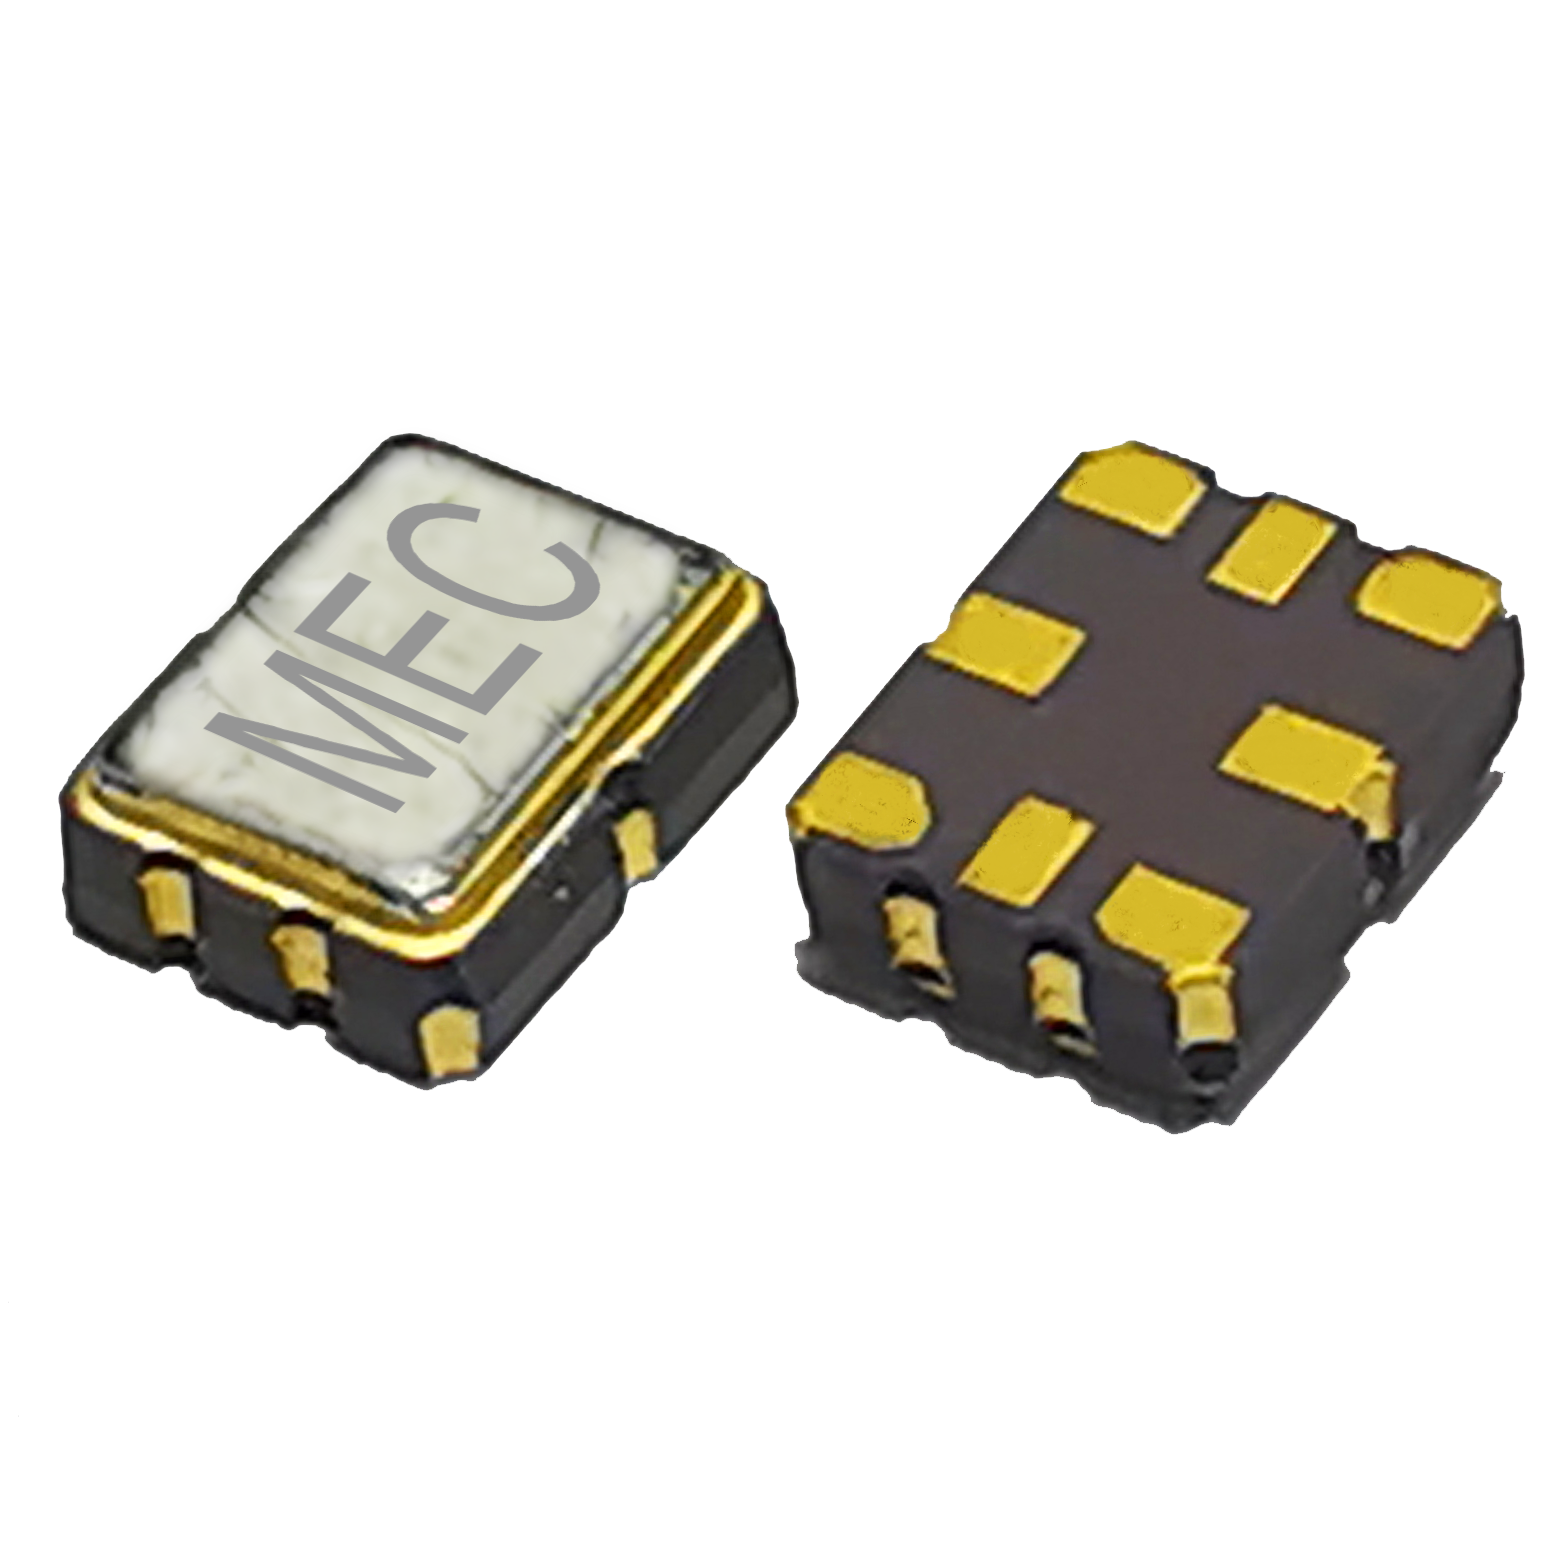 HQJF328 3225 2.5V Ultra Low Jitter Quick-turn Programmable Differential CML SMD Crystal Oscillator